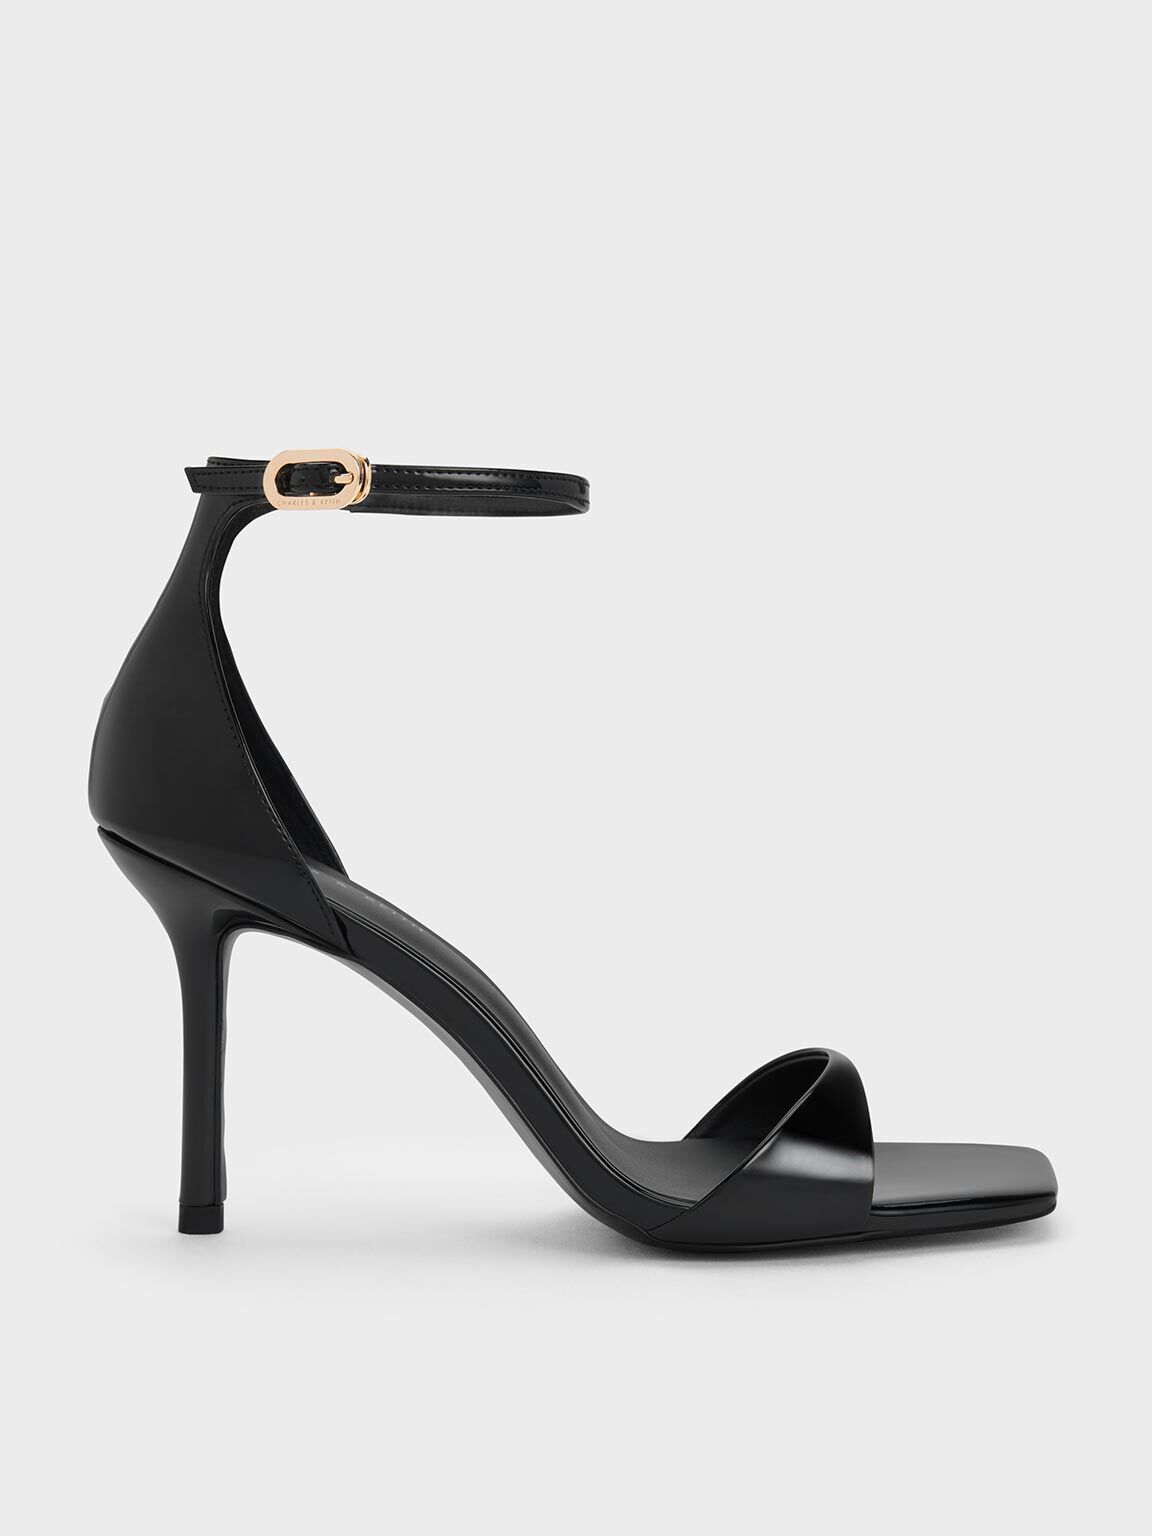 Buy Black Leather Heeled Sandals For Women | Indyverse